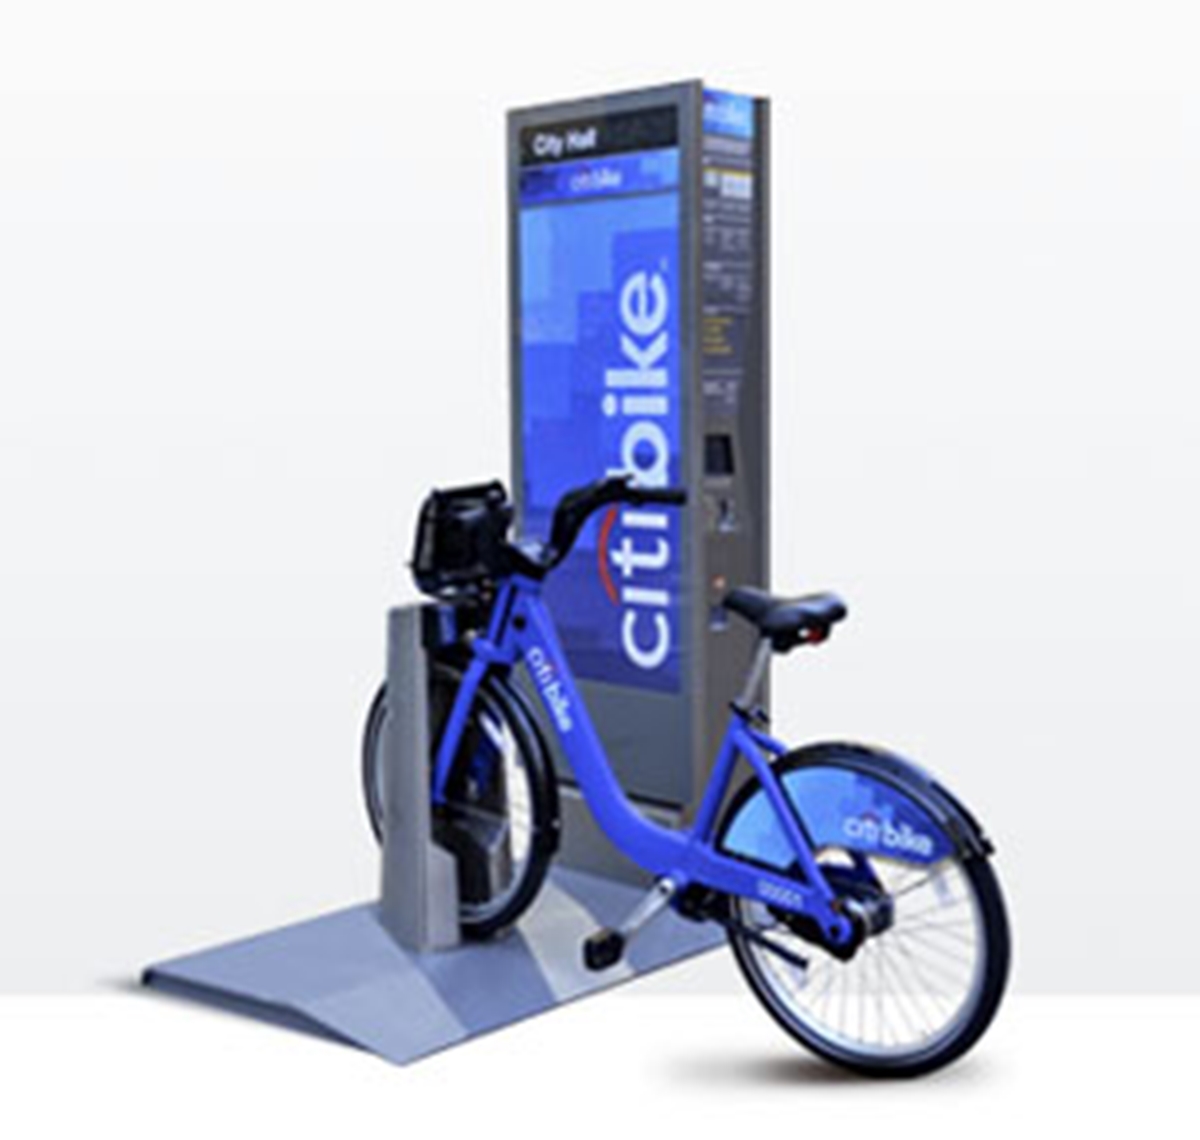 Citibank Bicycles with Successful Integrated Marketing Communication